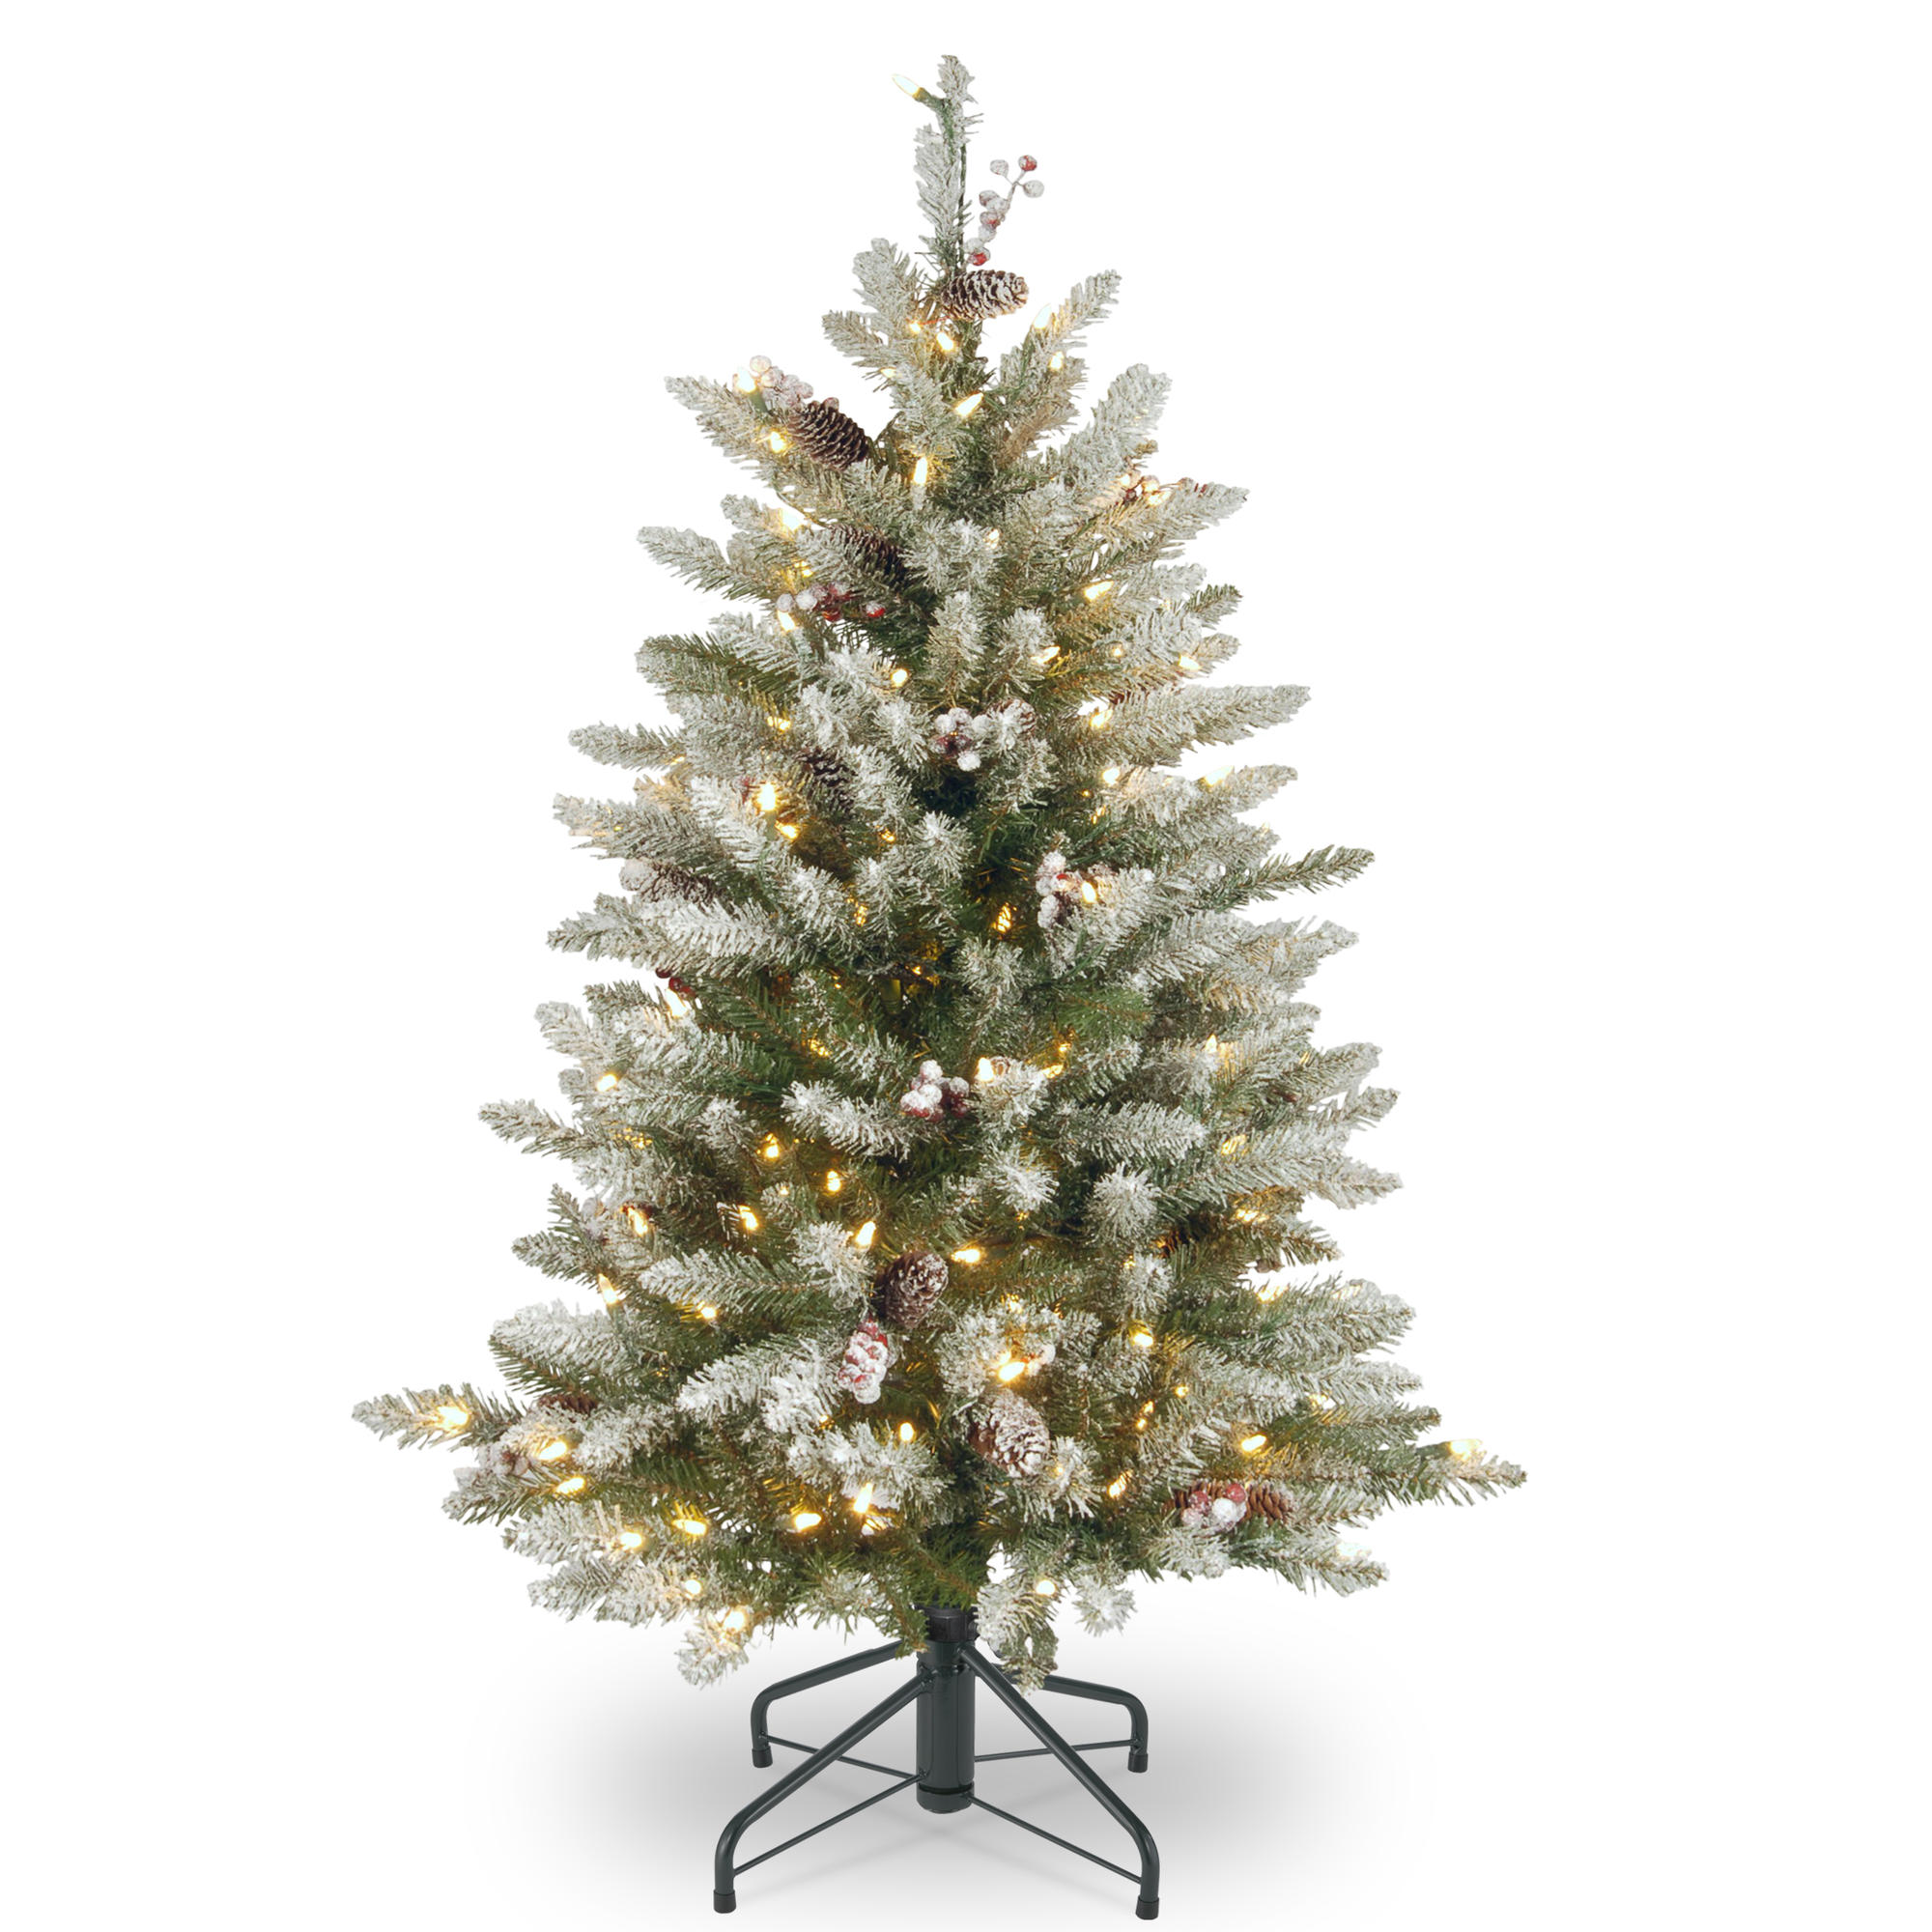 Michaels Artificial Christmas Trees - How To Blog